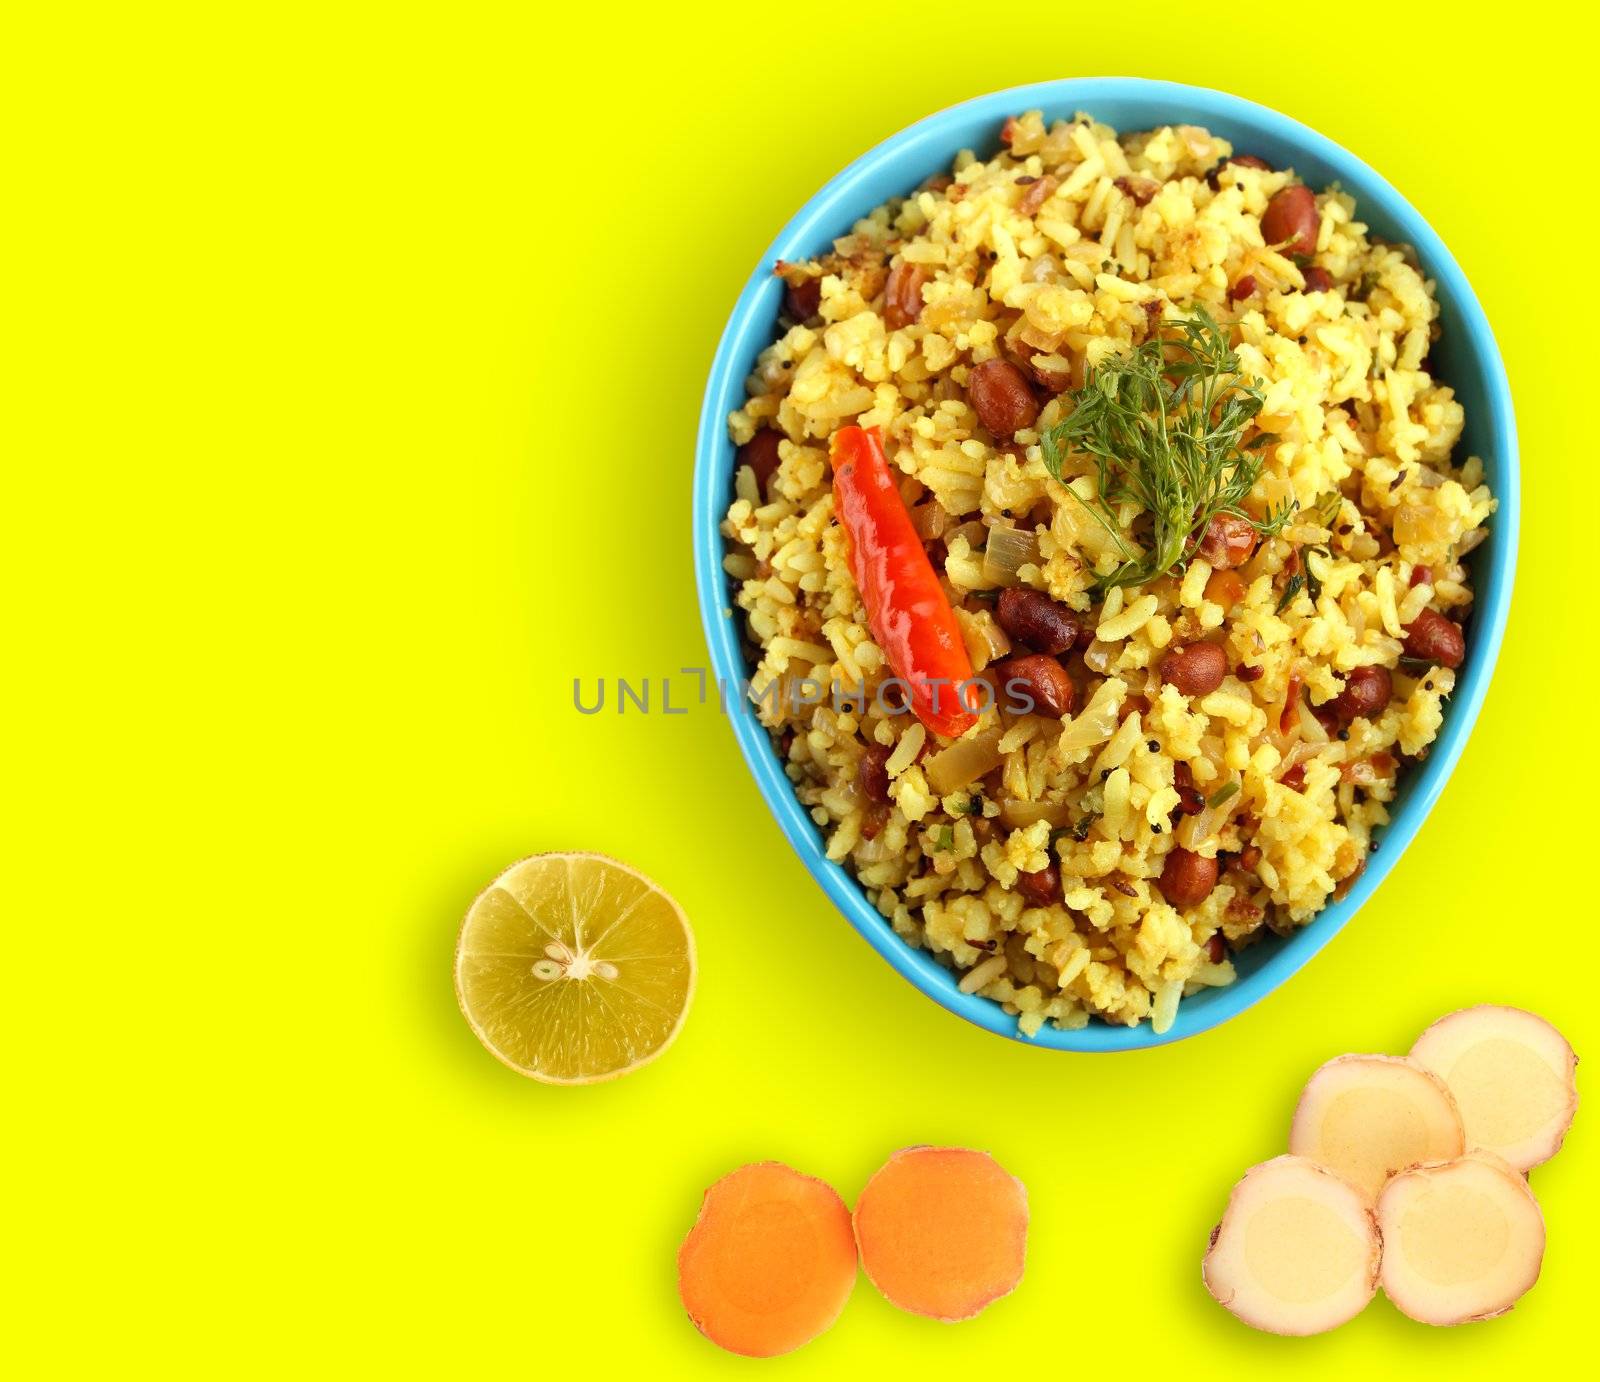 Spicy south indian breakfast called chitranna or poha with its ingredients - lemon, ginger and fresh turmeric.